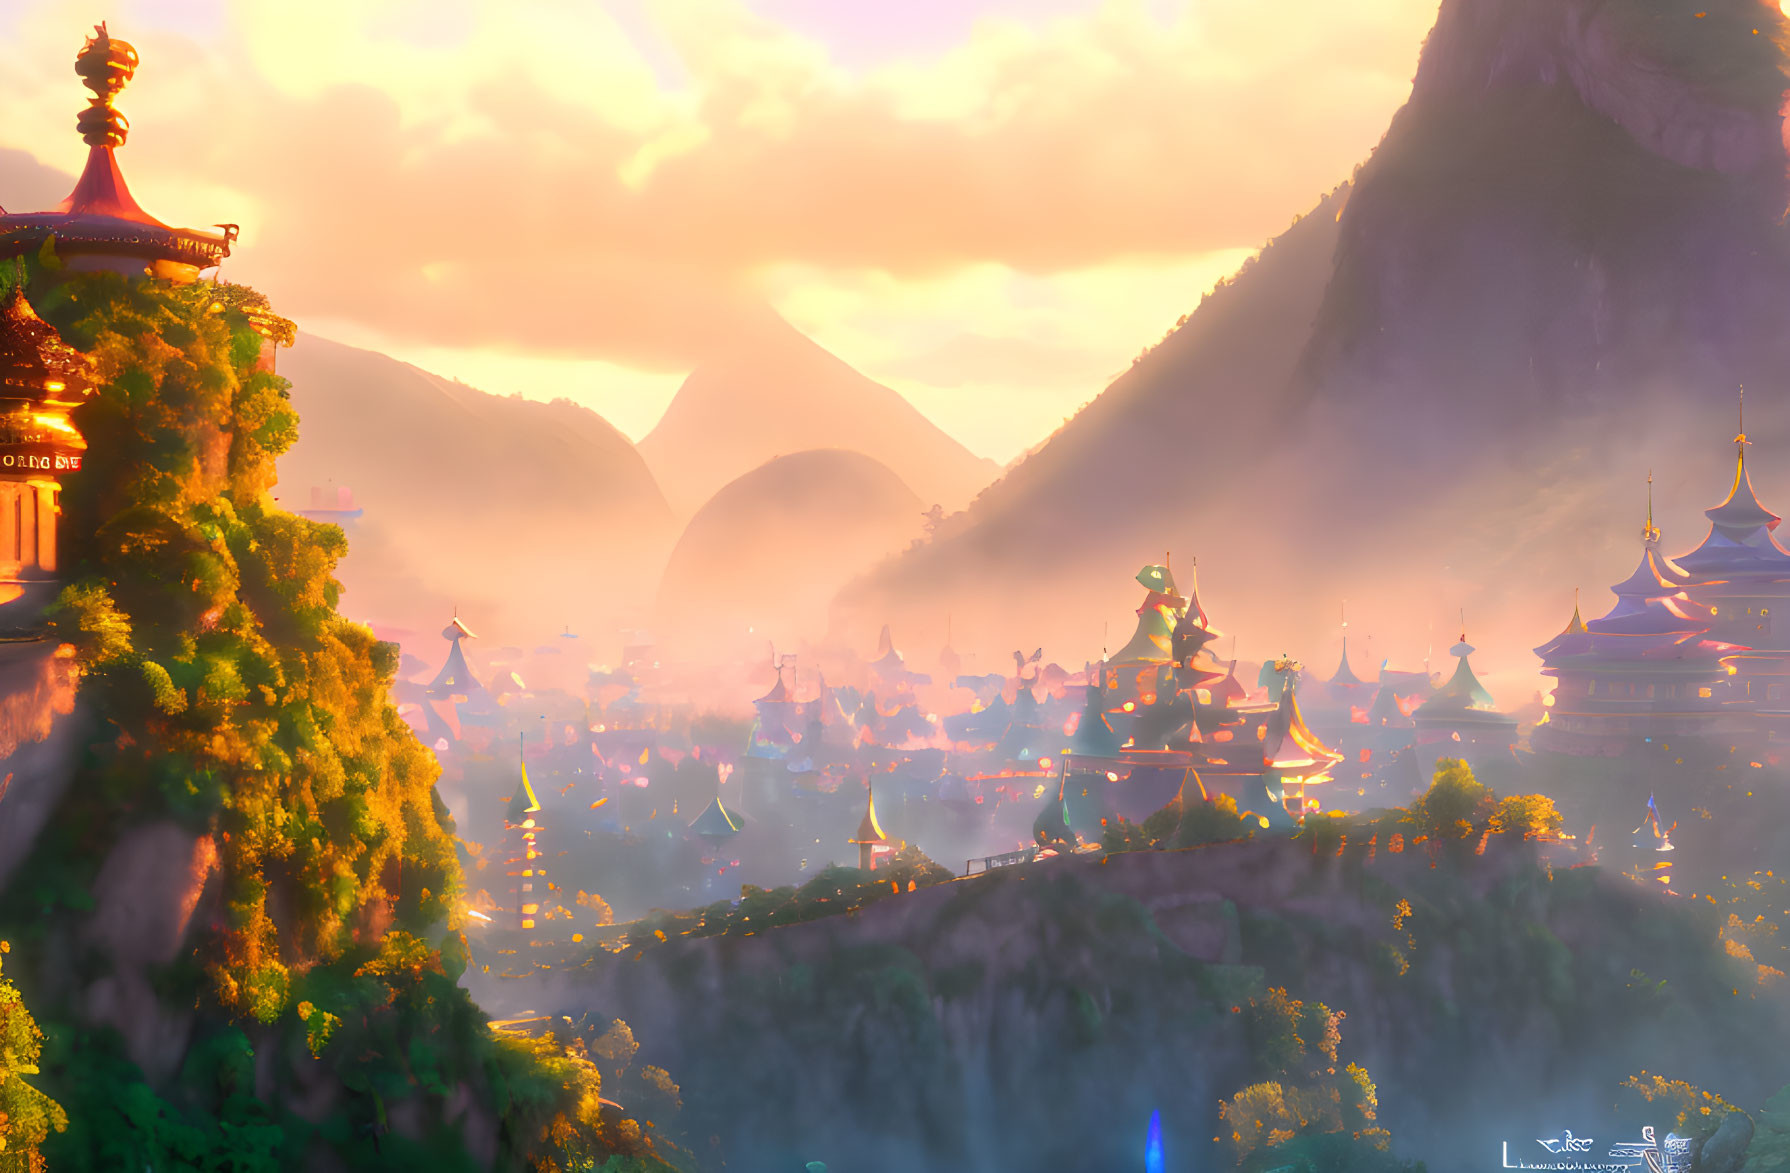 Enchanting Valley with Pagoda-Style Buildings and Misty Peaks at Sunset